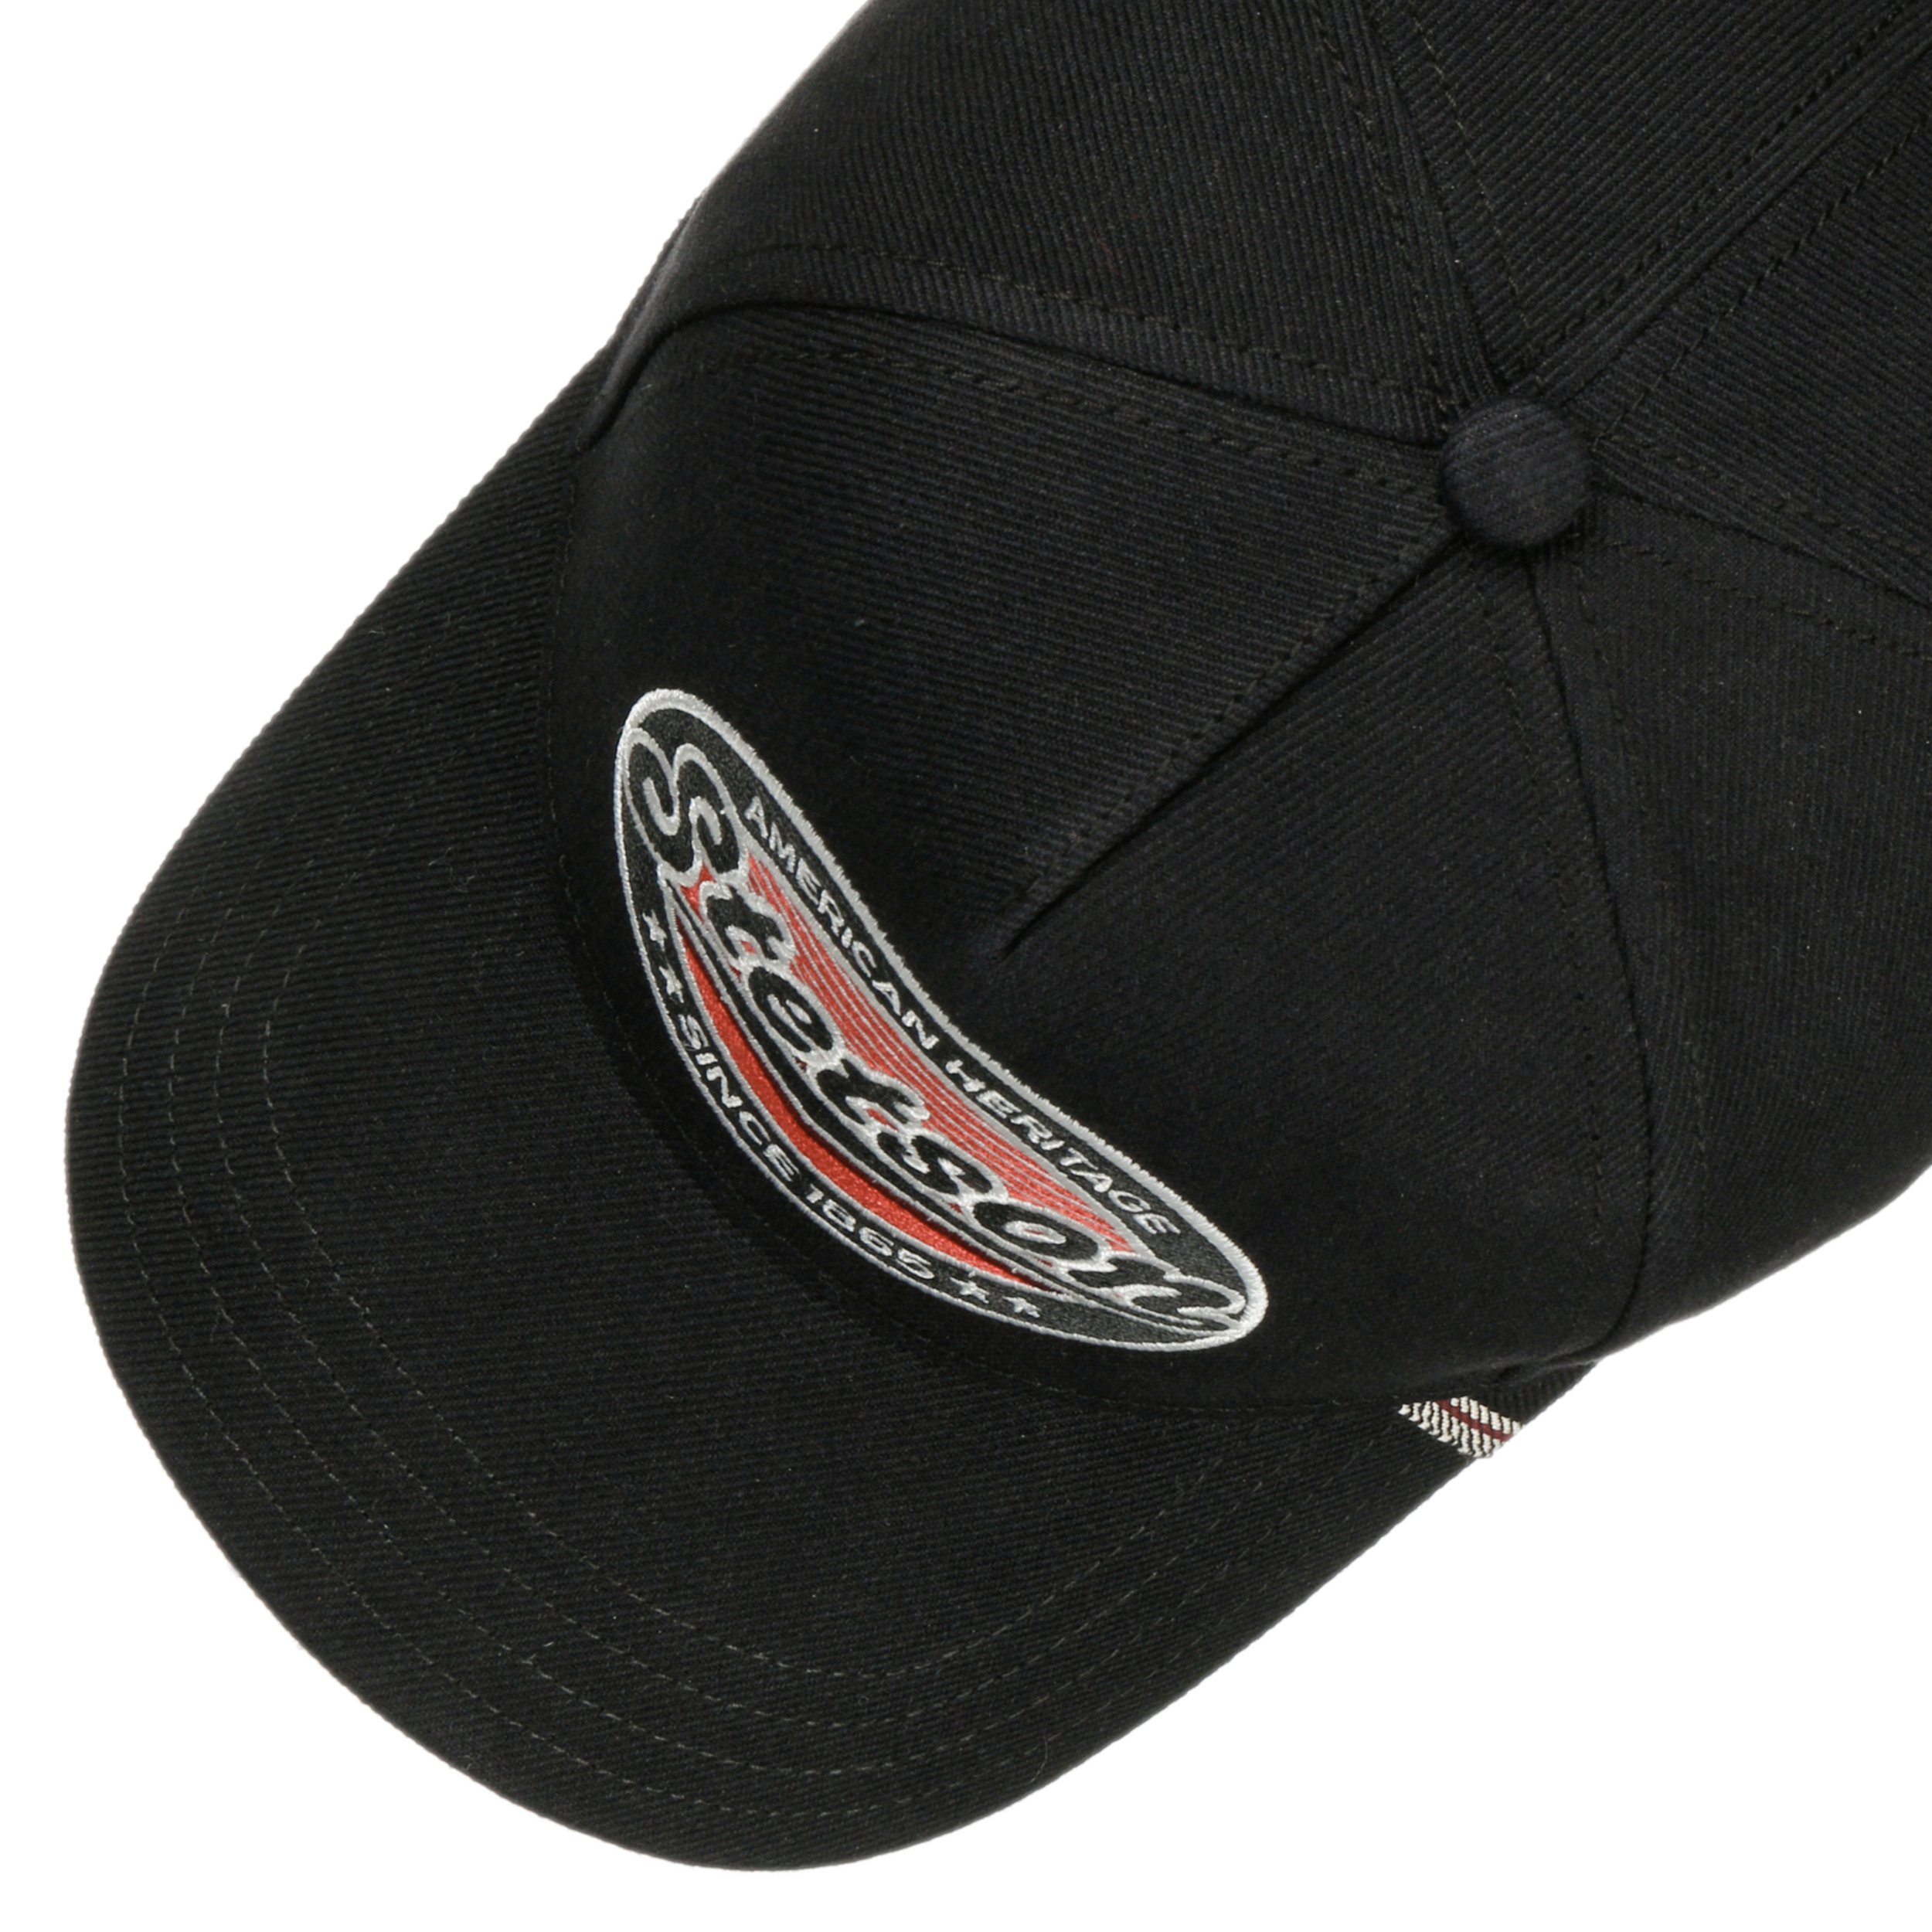 Casquette Selvage Denim by Stetson - 105,95 CHF